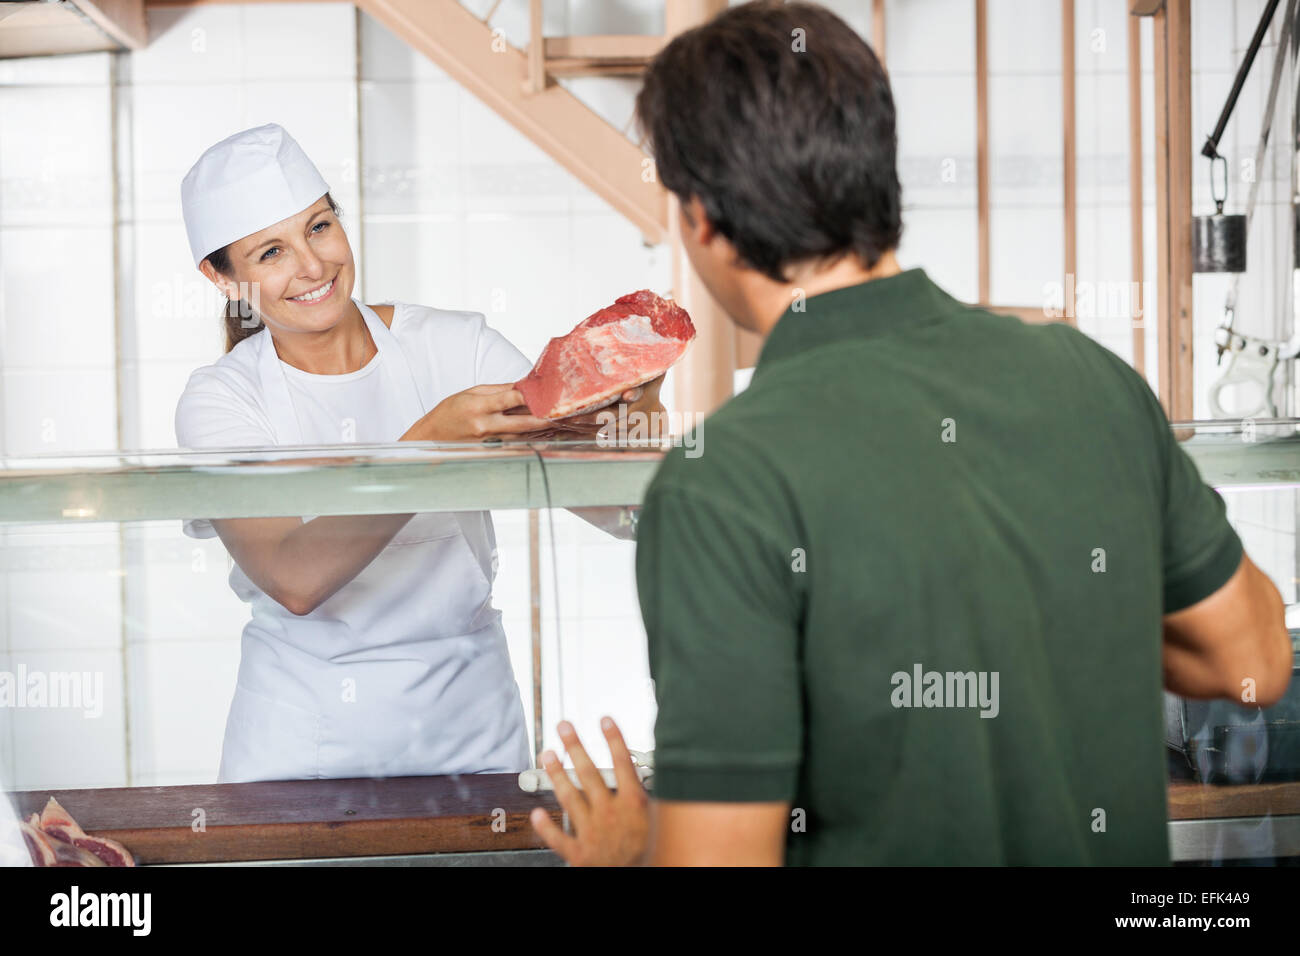 Female Butcher Selling Fresh Meat To Customer Stock Photo